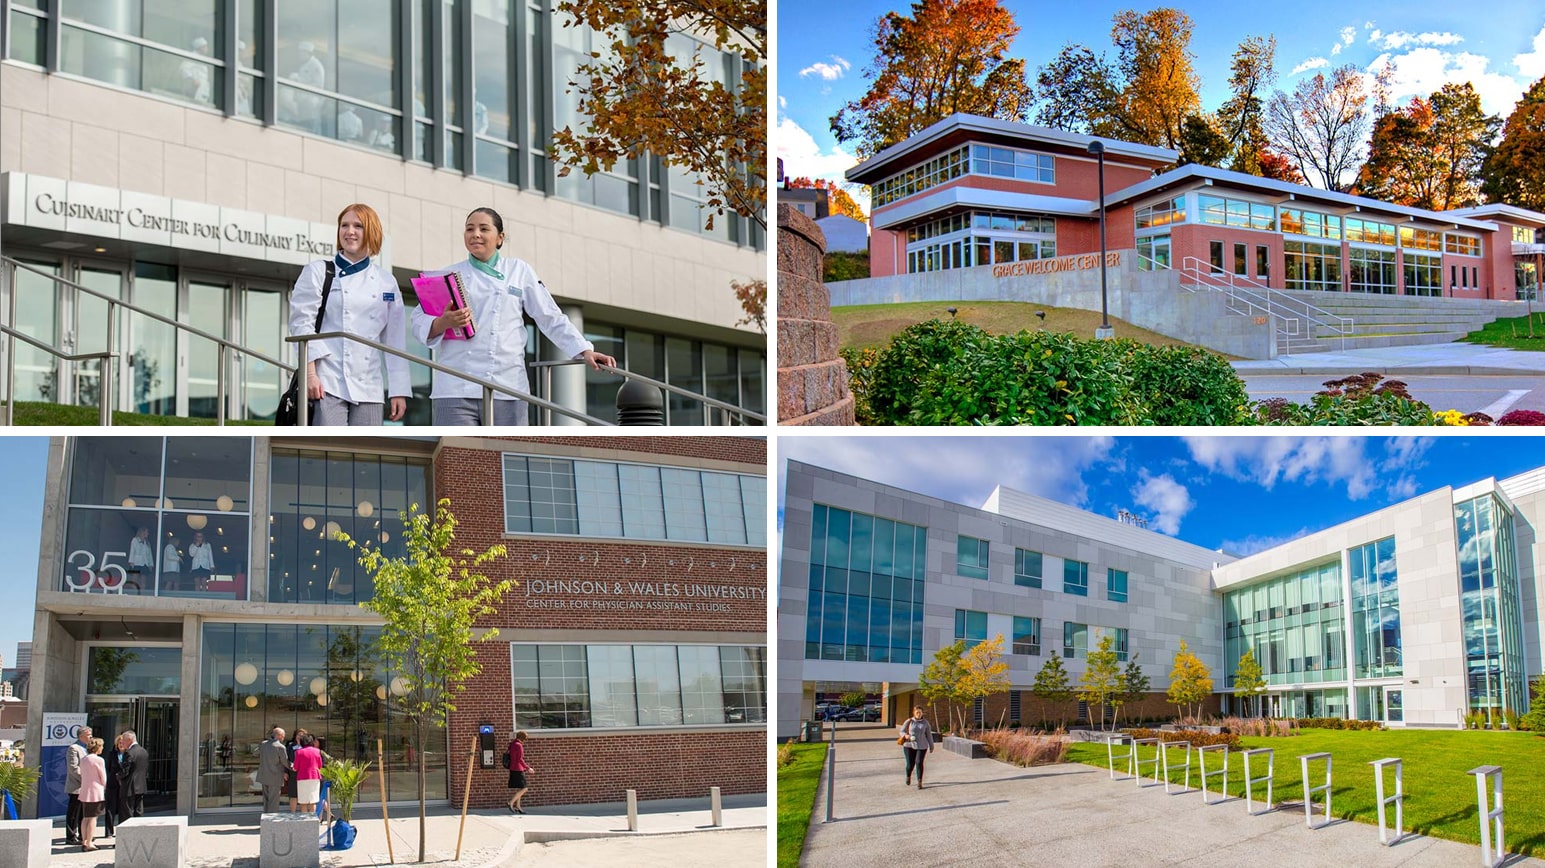 LEED Gold Certified Buildings, clockwise from left: Cuisinart Center for Culinary Excellence, Grace Welcome Center, Bowen Center for Science and Innovation, Center for Physician Assistant Studies.